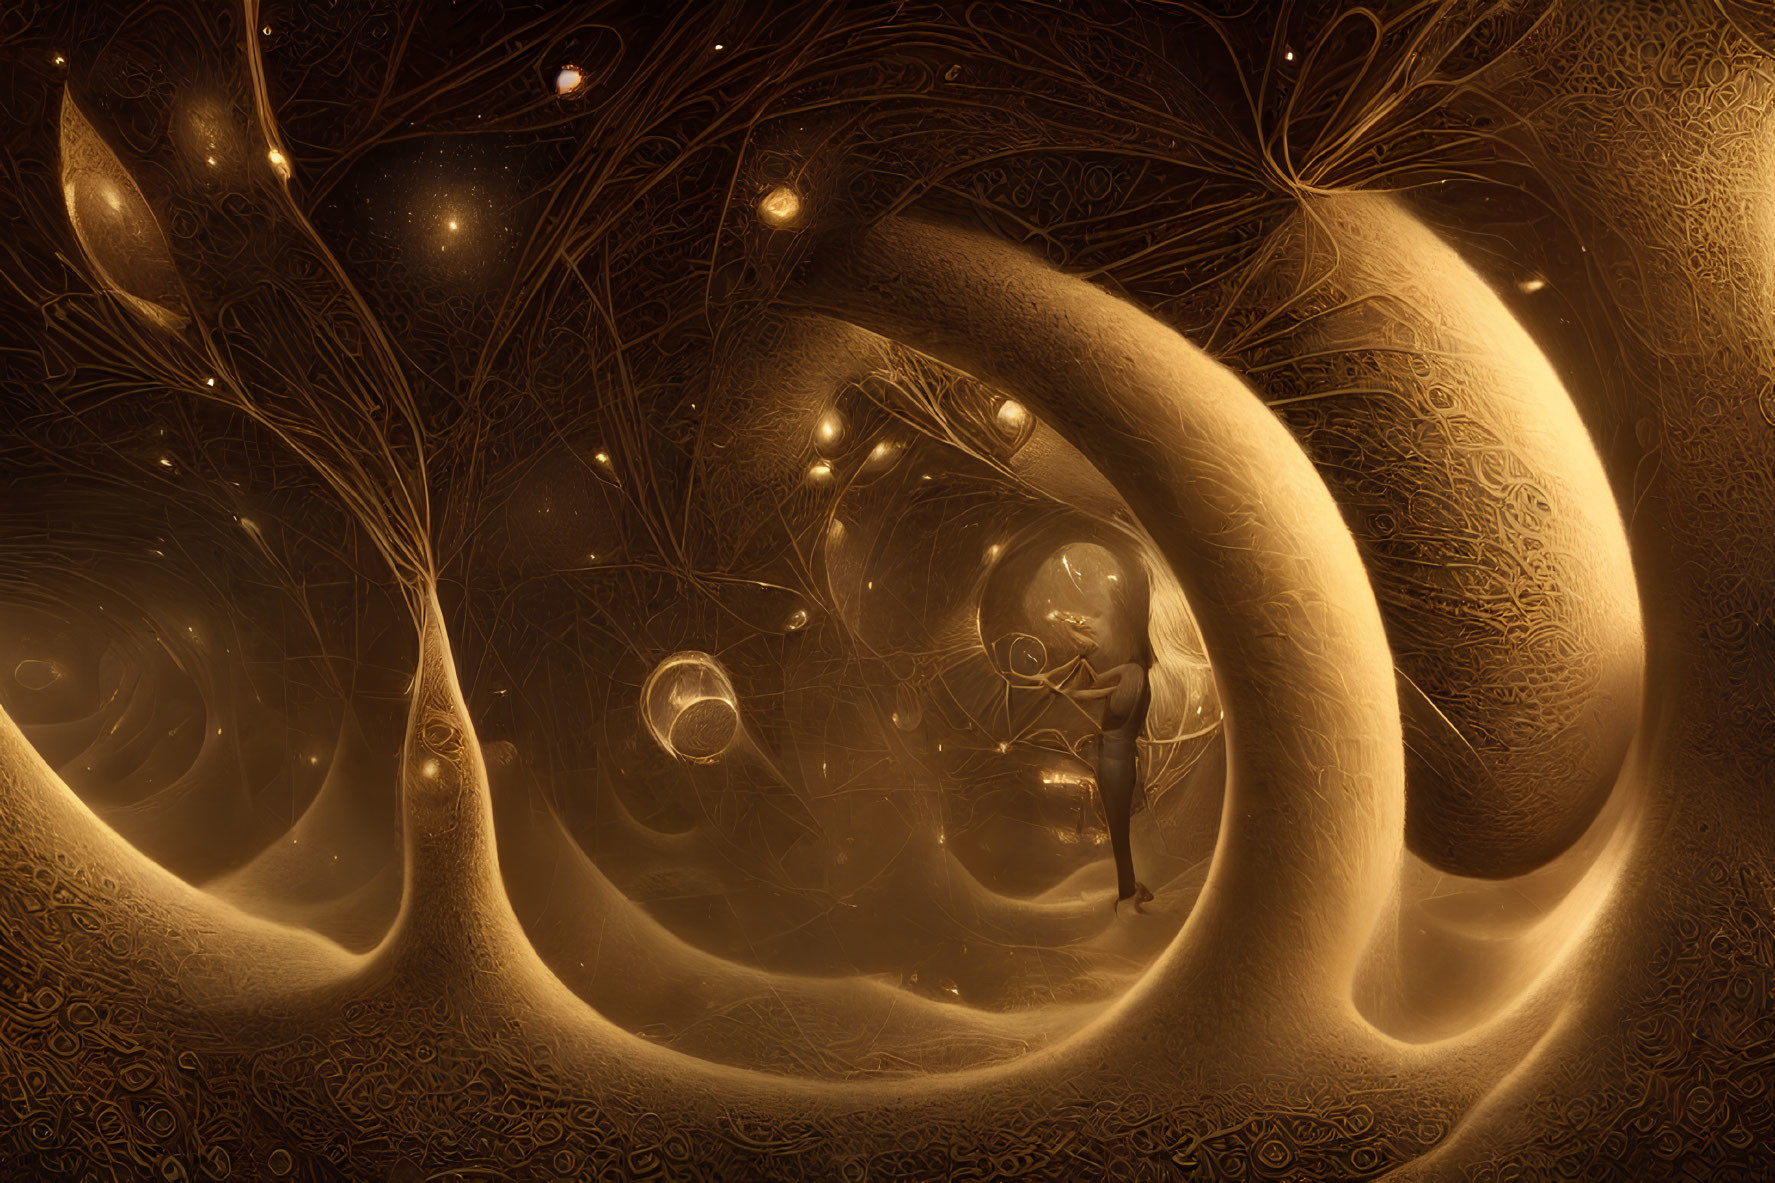 Ethereal golden fractal forest with swirling patterns and soft lights